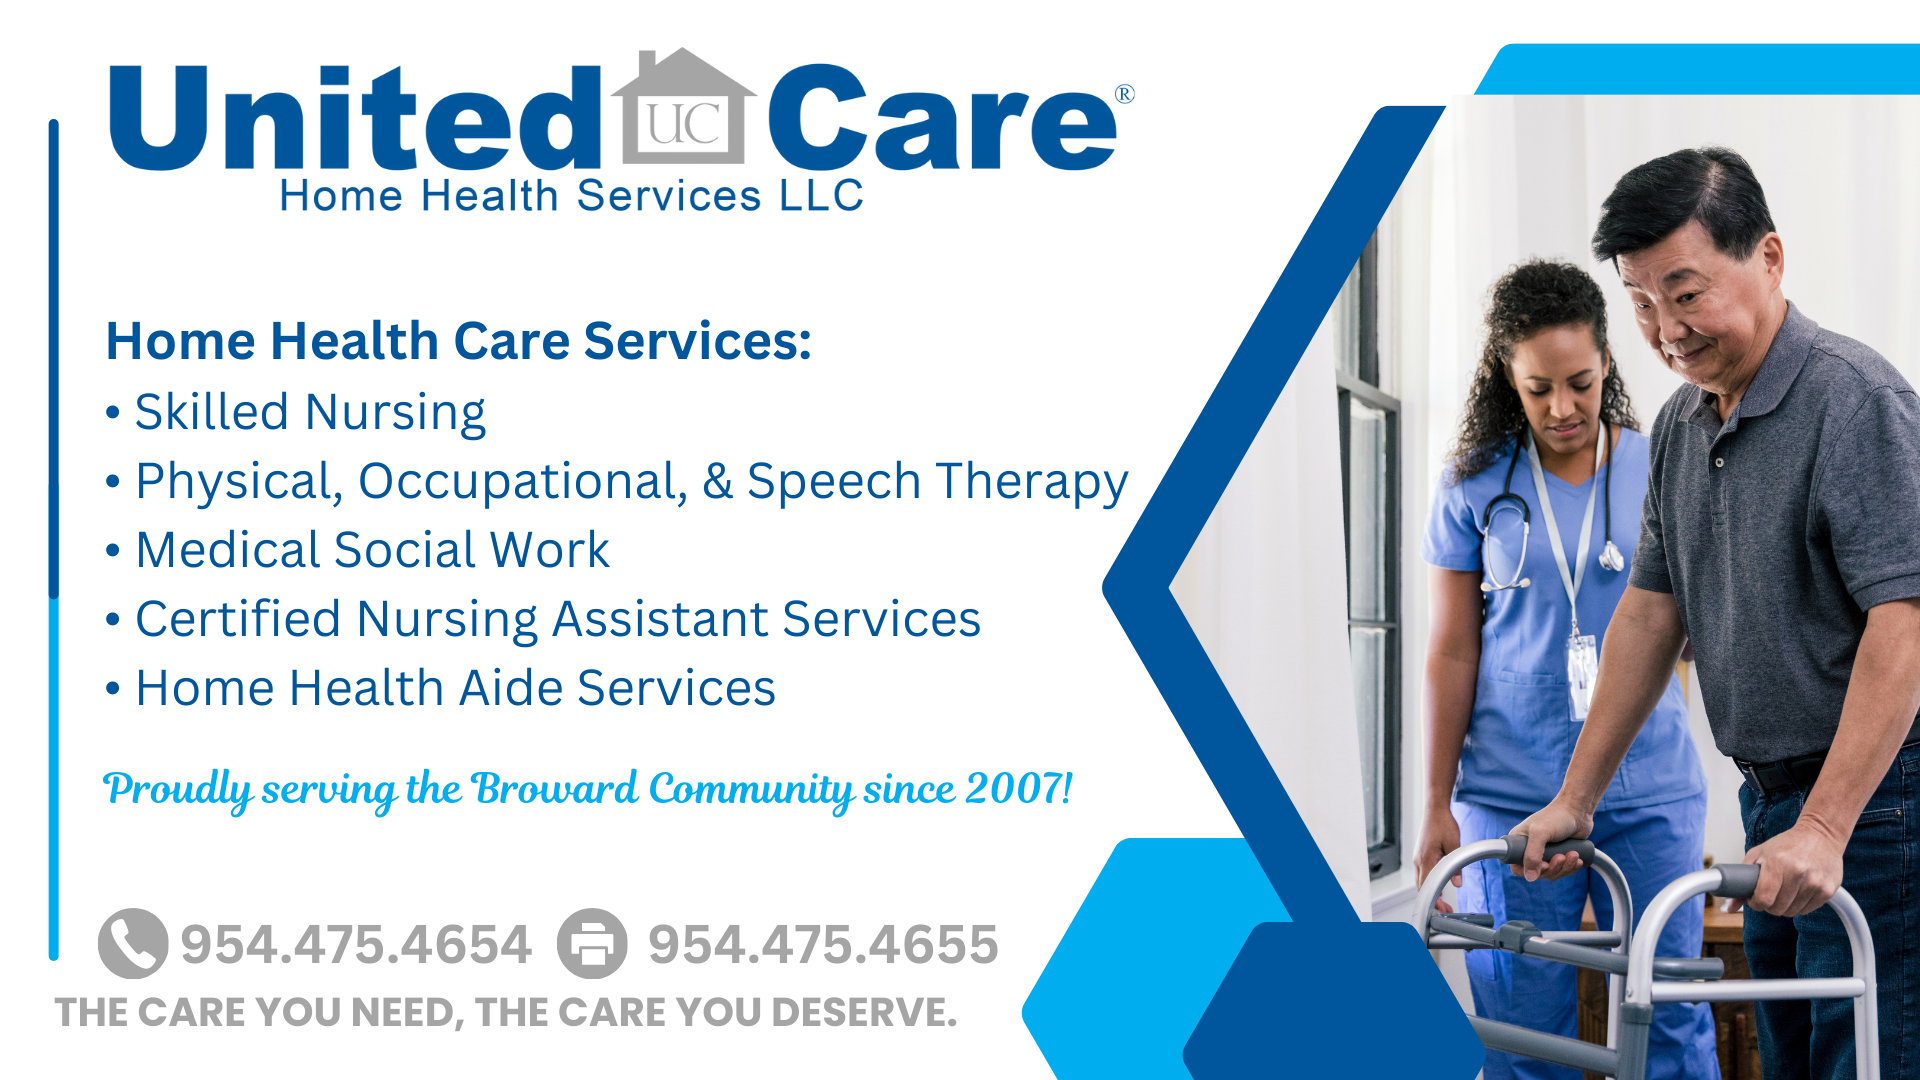 United Care Home Health Services LLC